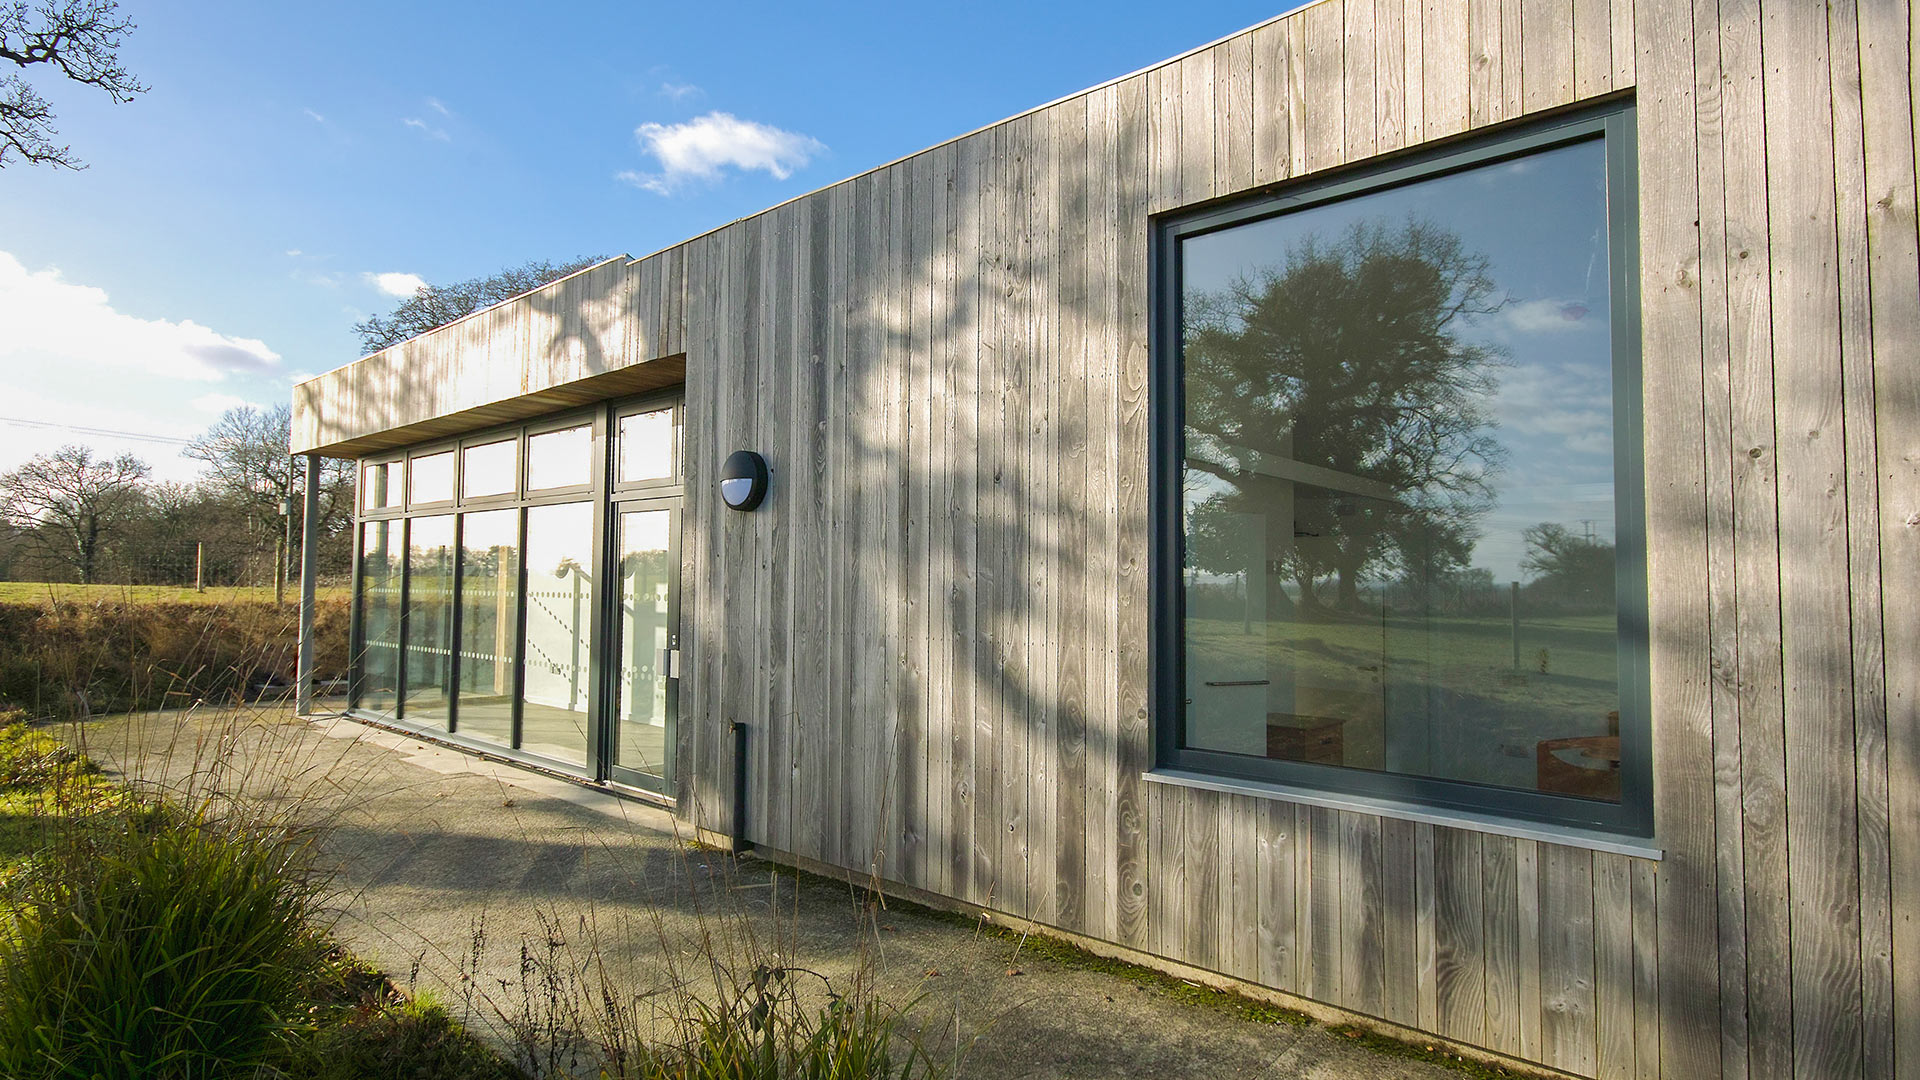 external side view of care centre with wood cladding and large windows